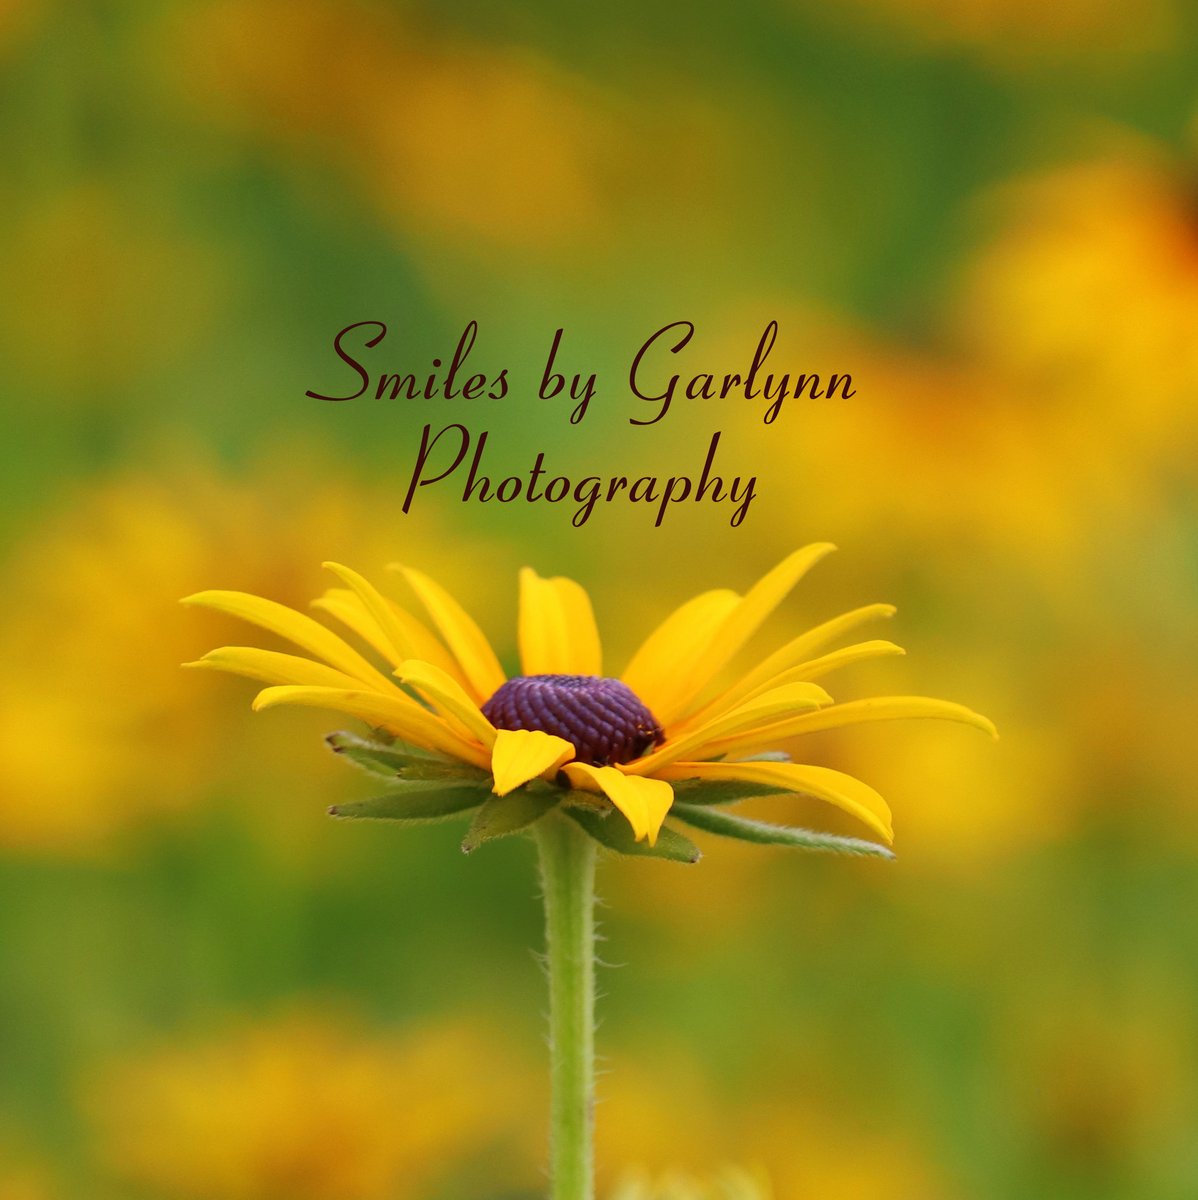 Smiles by Garlynn Photography